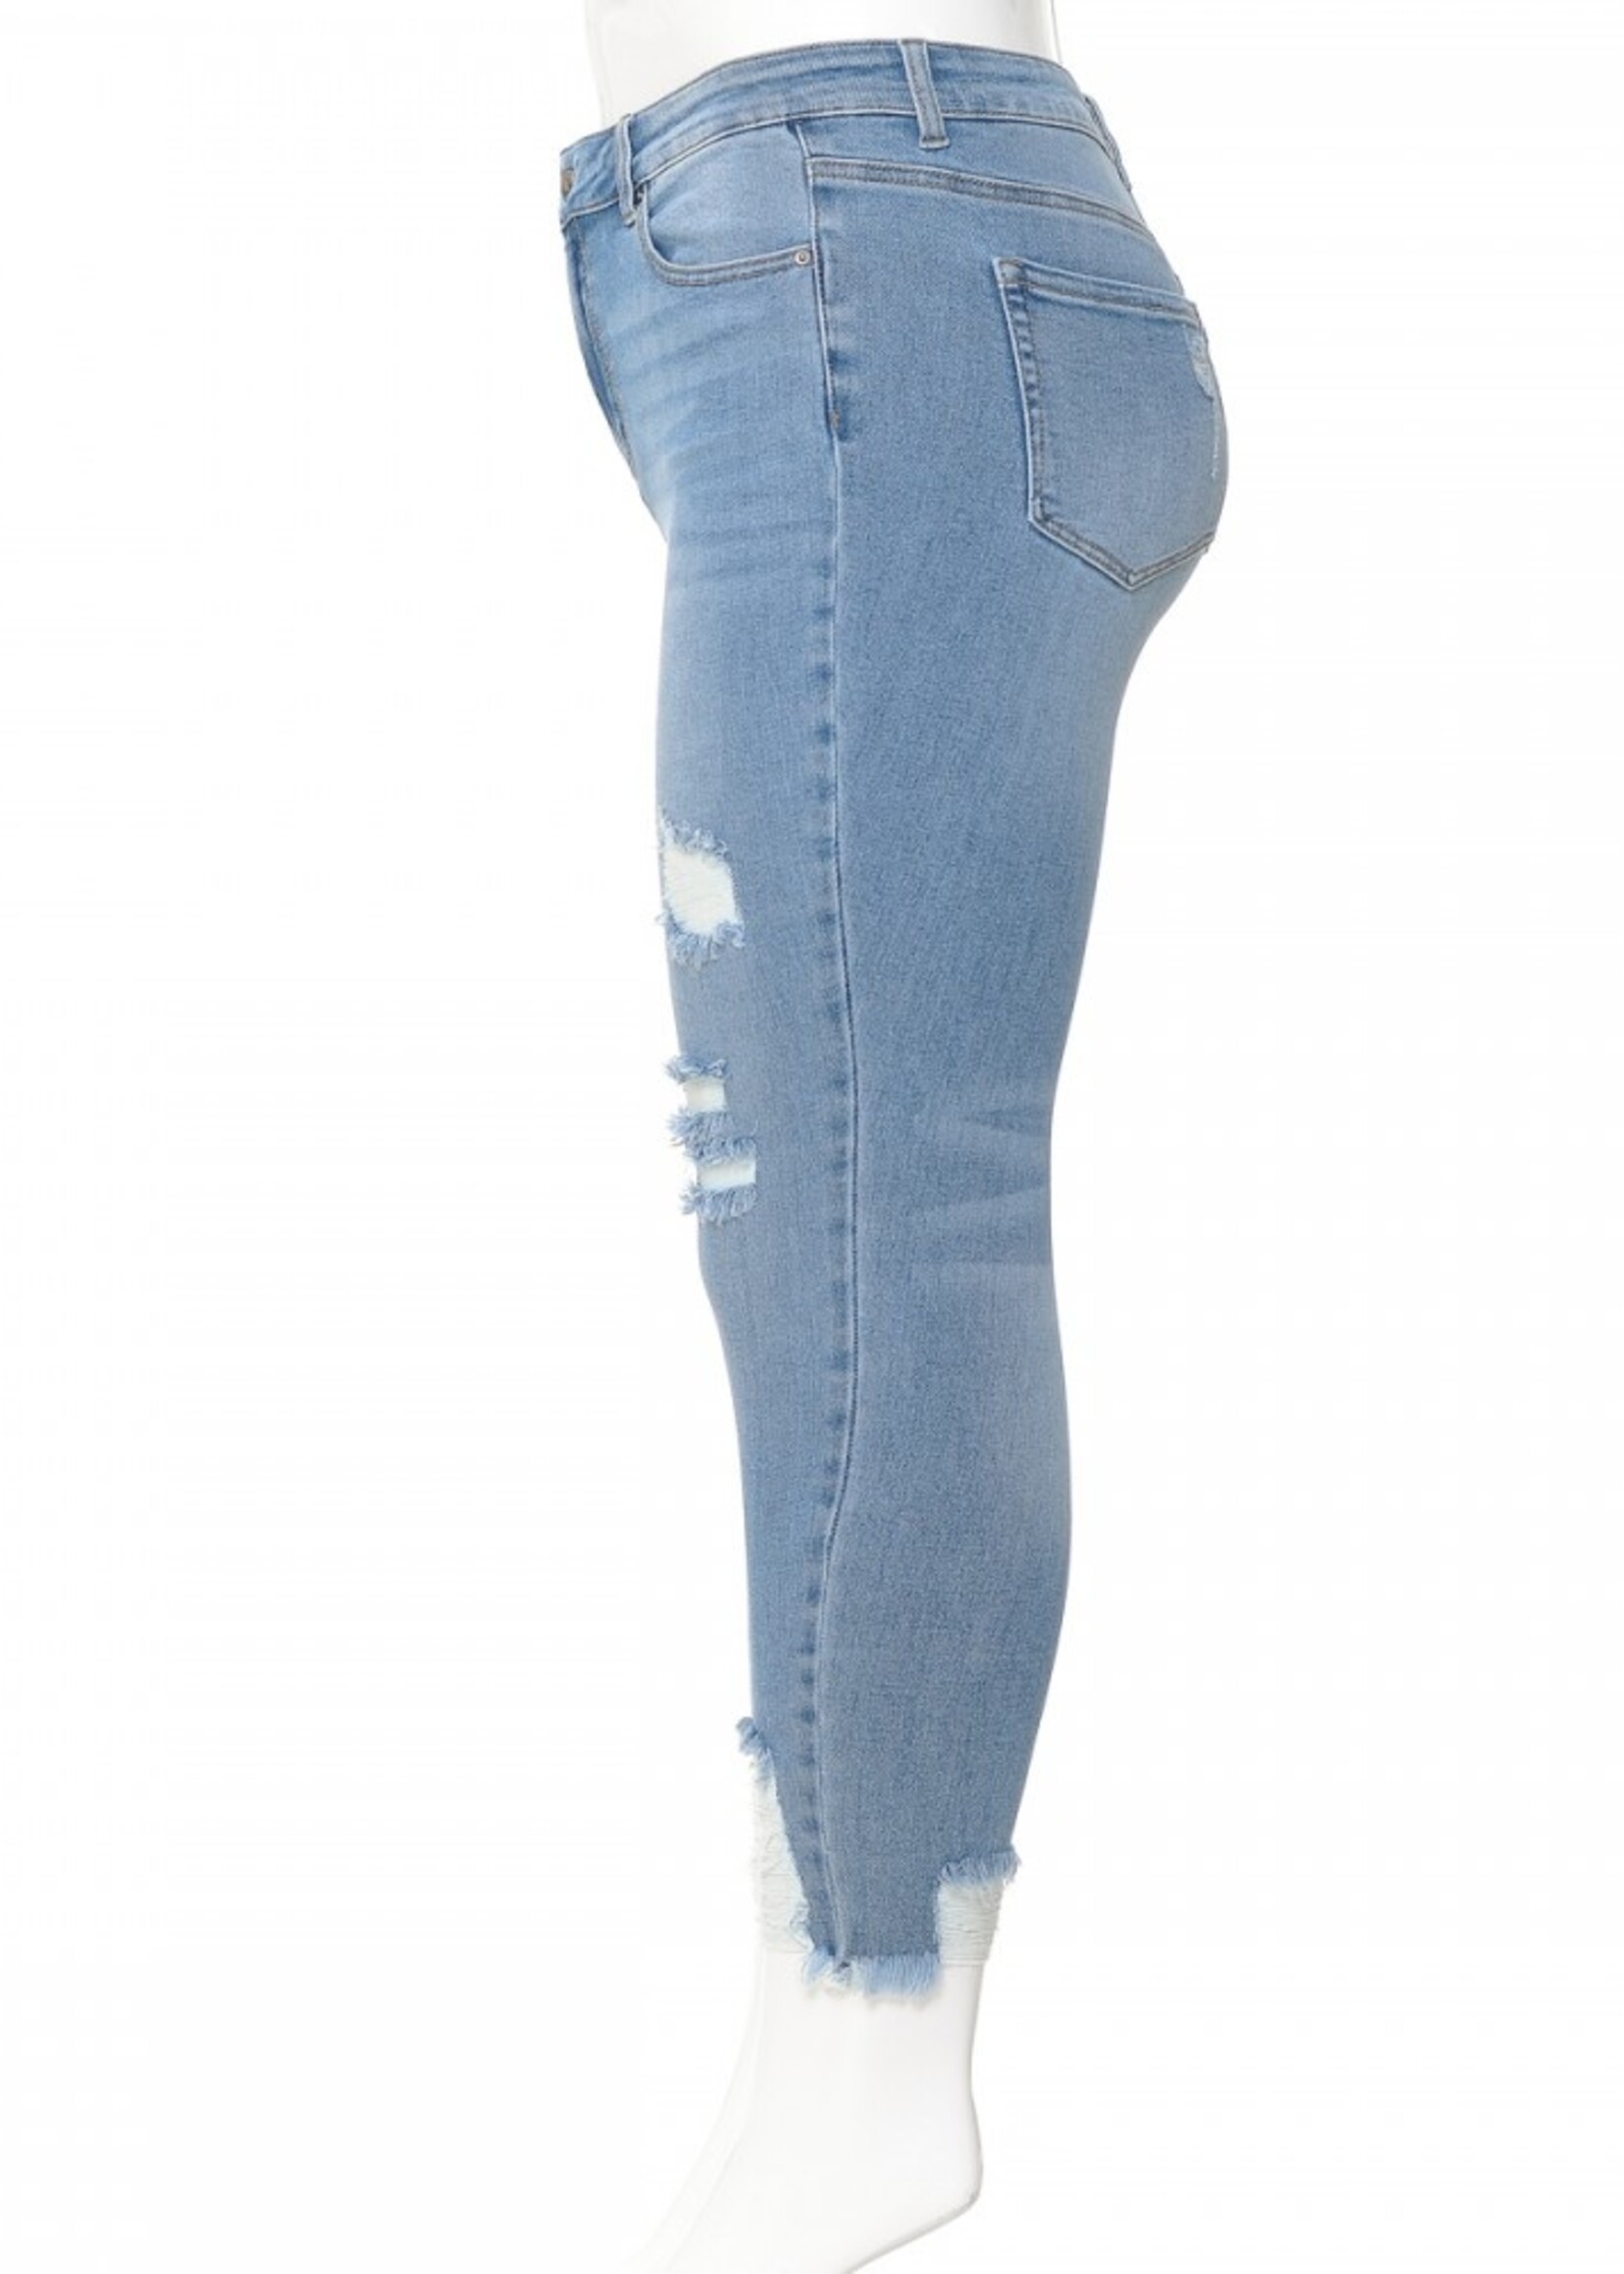 Women's Ripped Jeans, Distressed Jeans